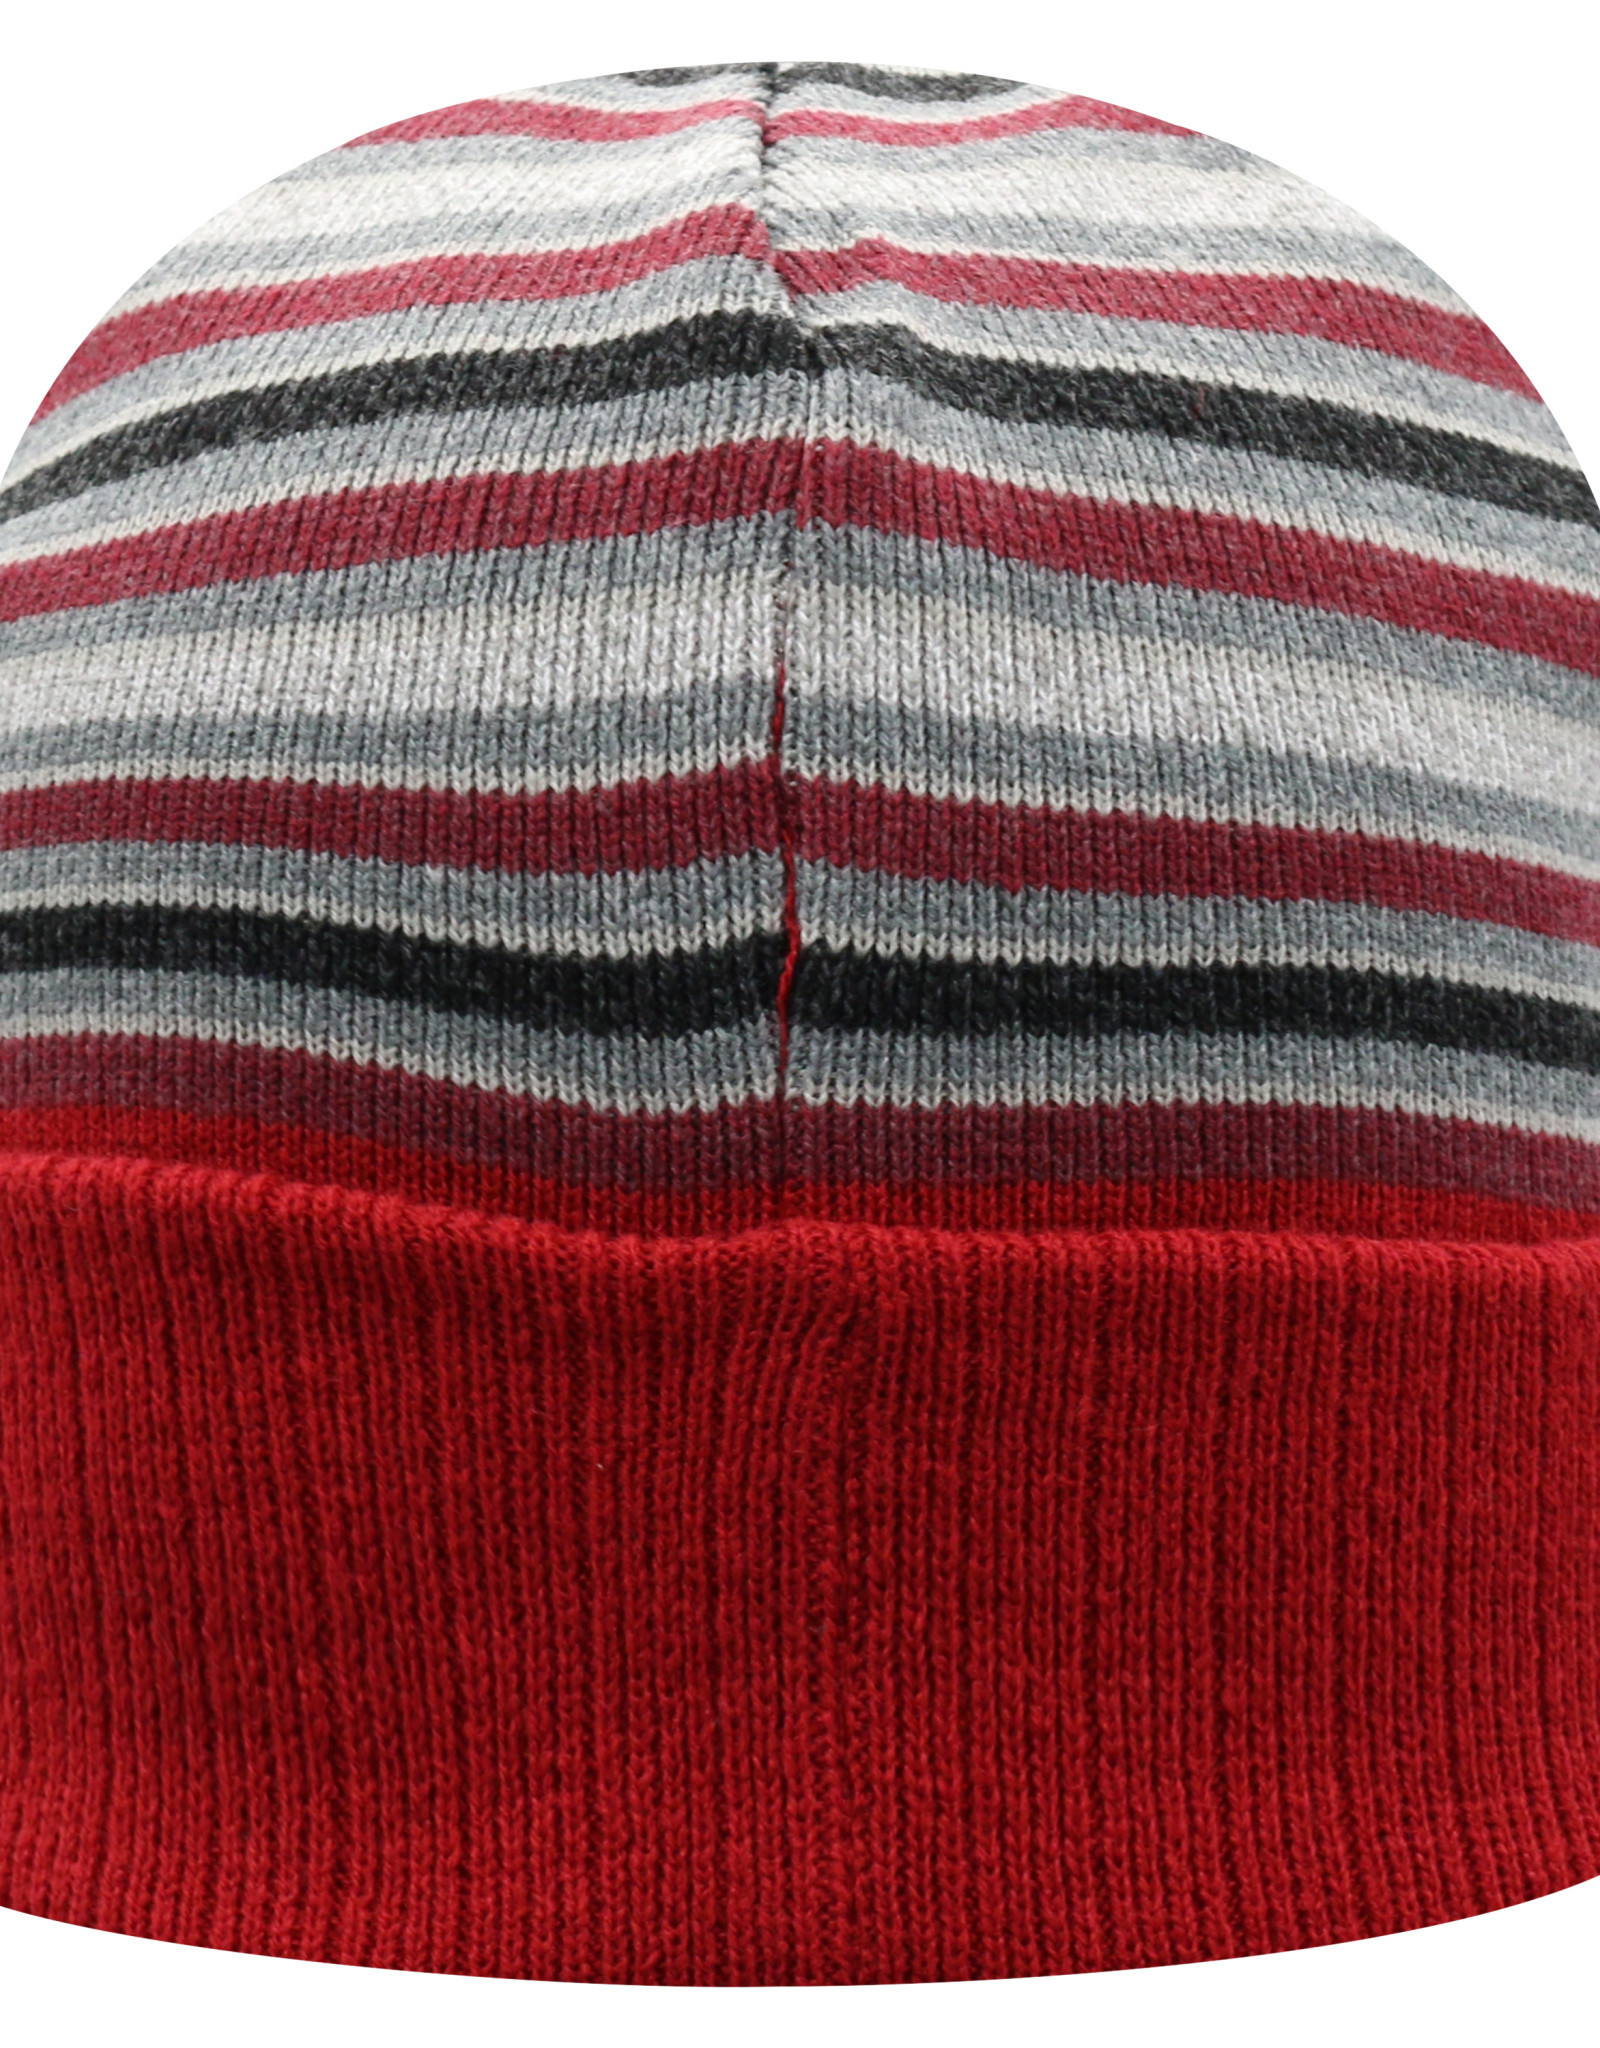 TOW TOW McGoat Cuffed Knit Cap